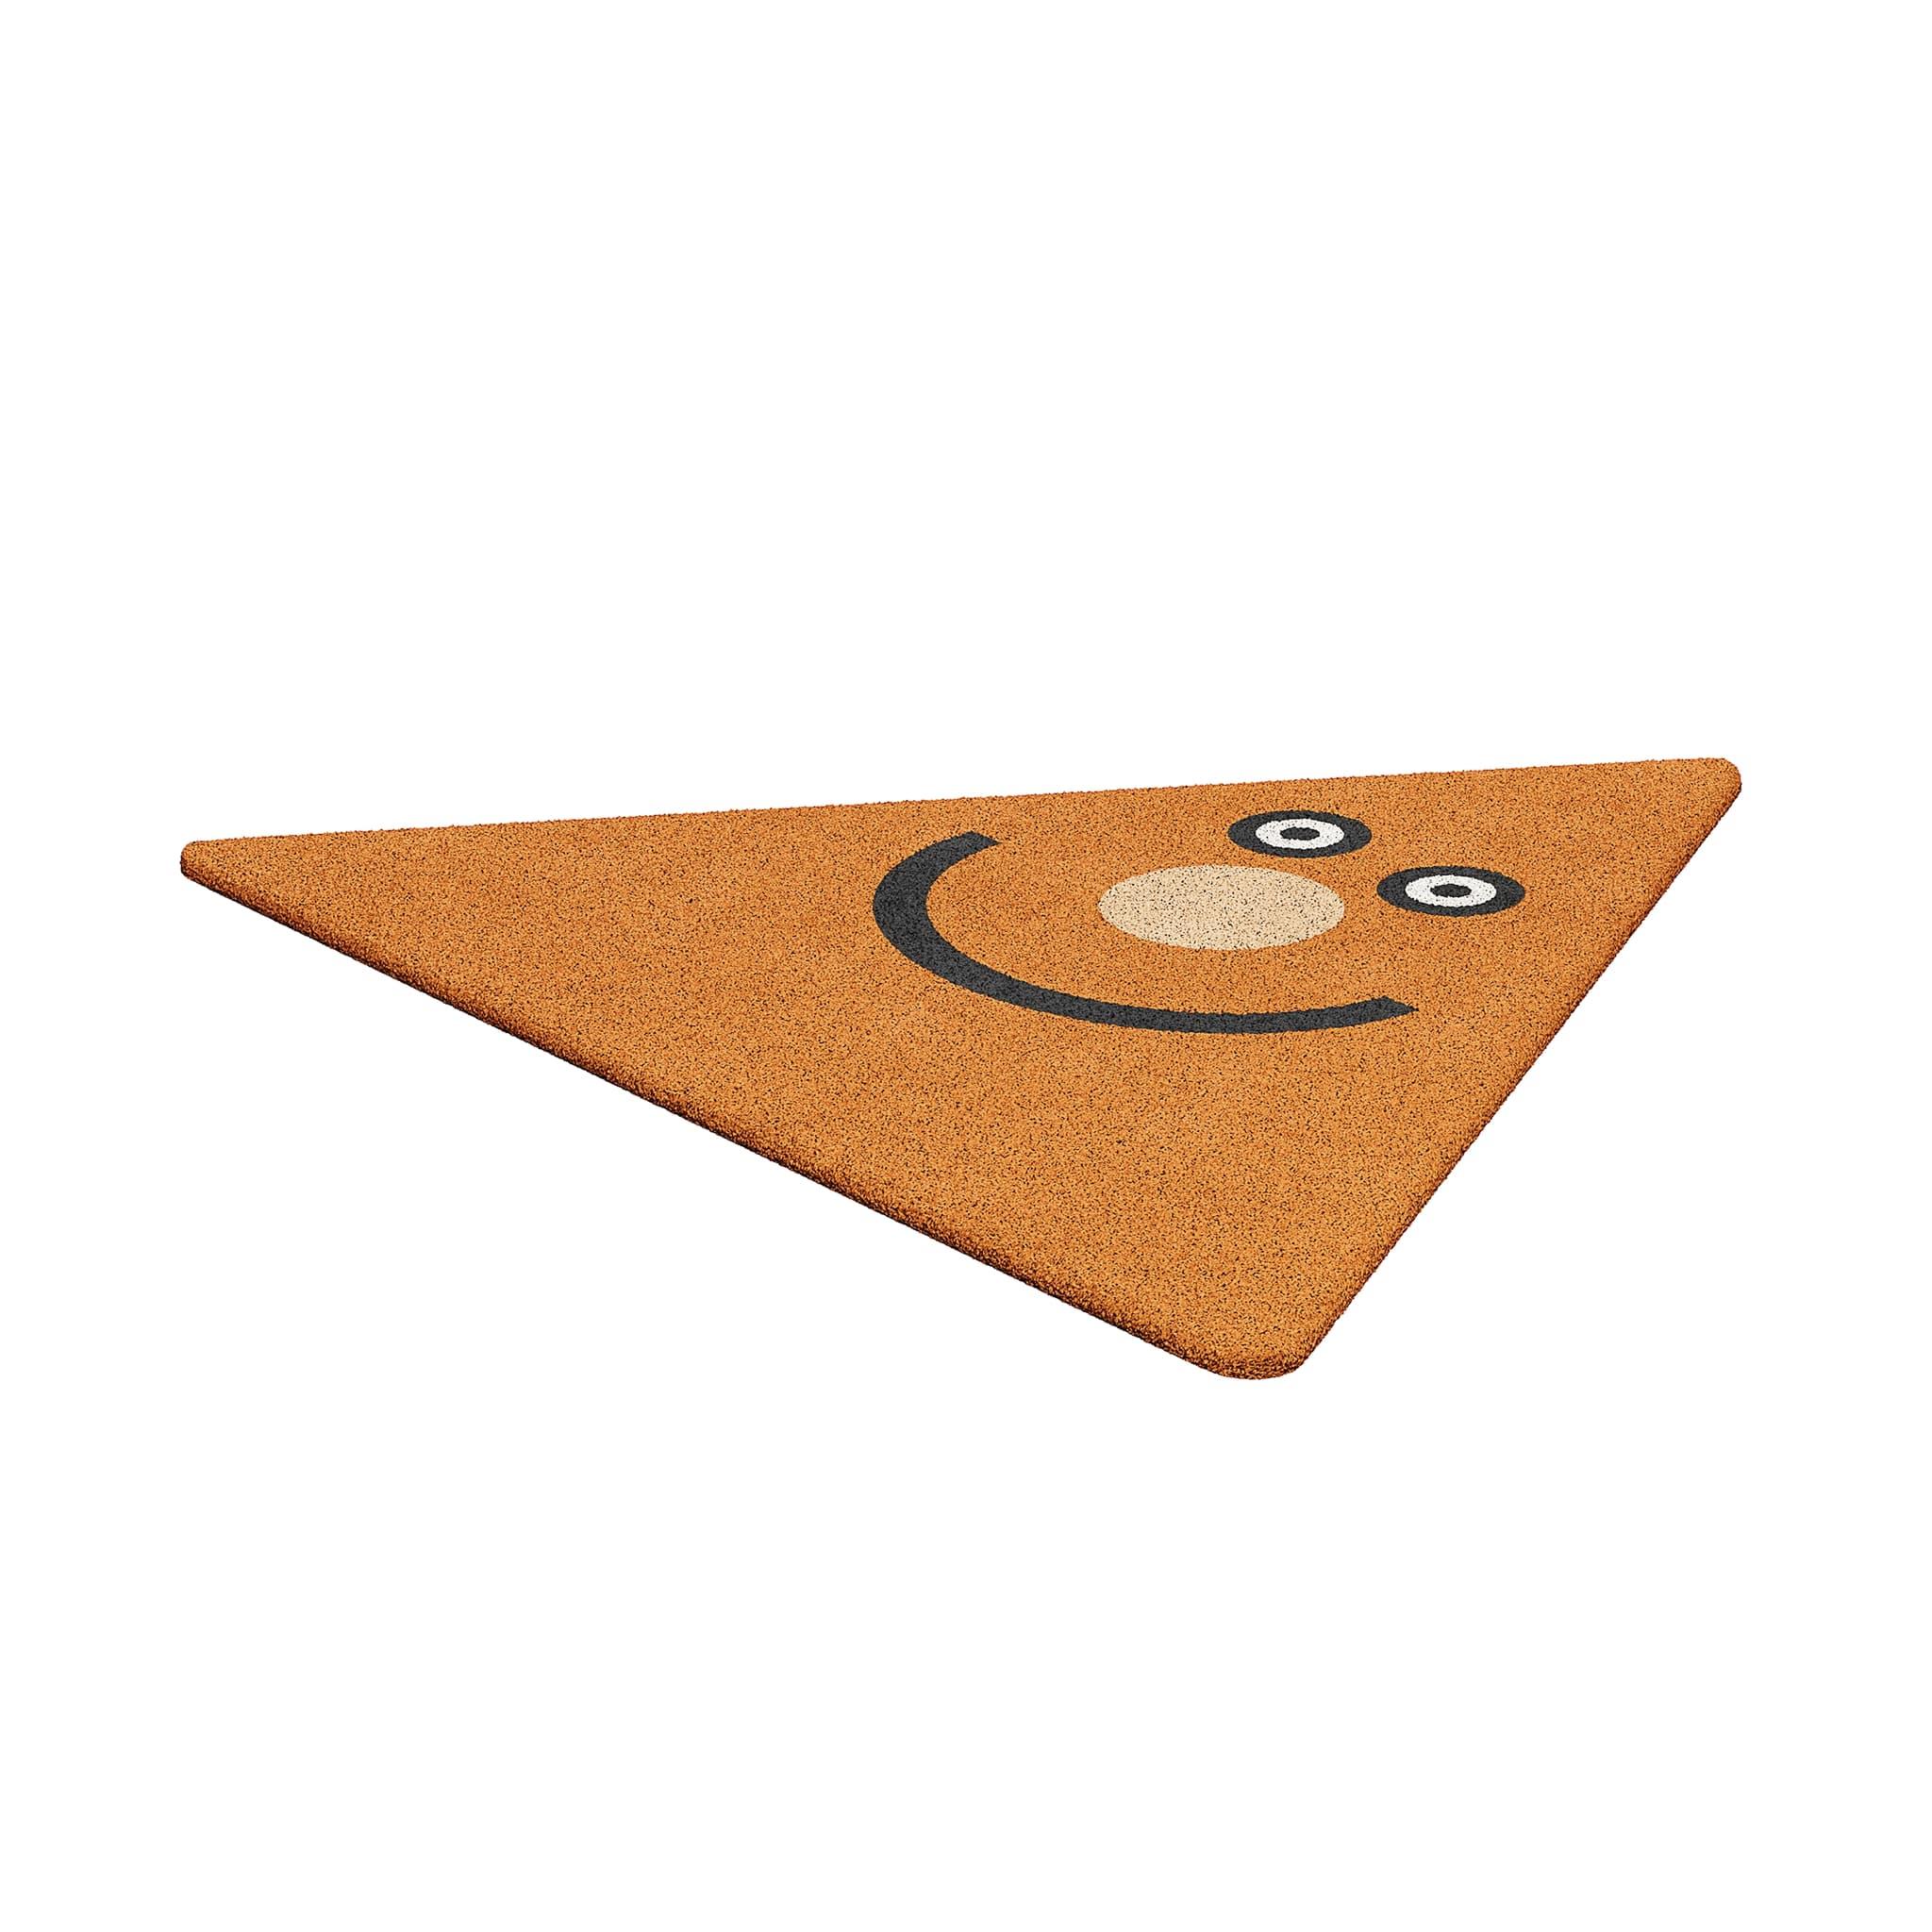 Tapis Kids #014 is a fun rug for playful and creative moments. It was made to be enjoyed with your loved ones, creating happy memories that will last a lifetime. 

Handcrafted with Wool, an environmentally friendly material, this kid rug was made